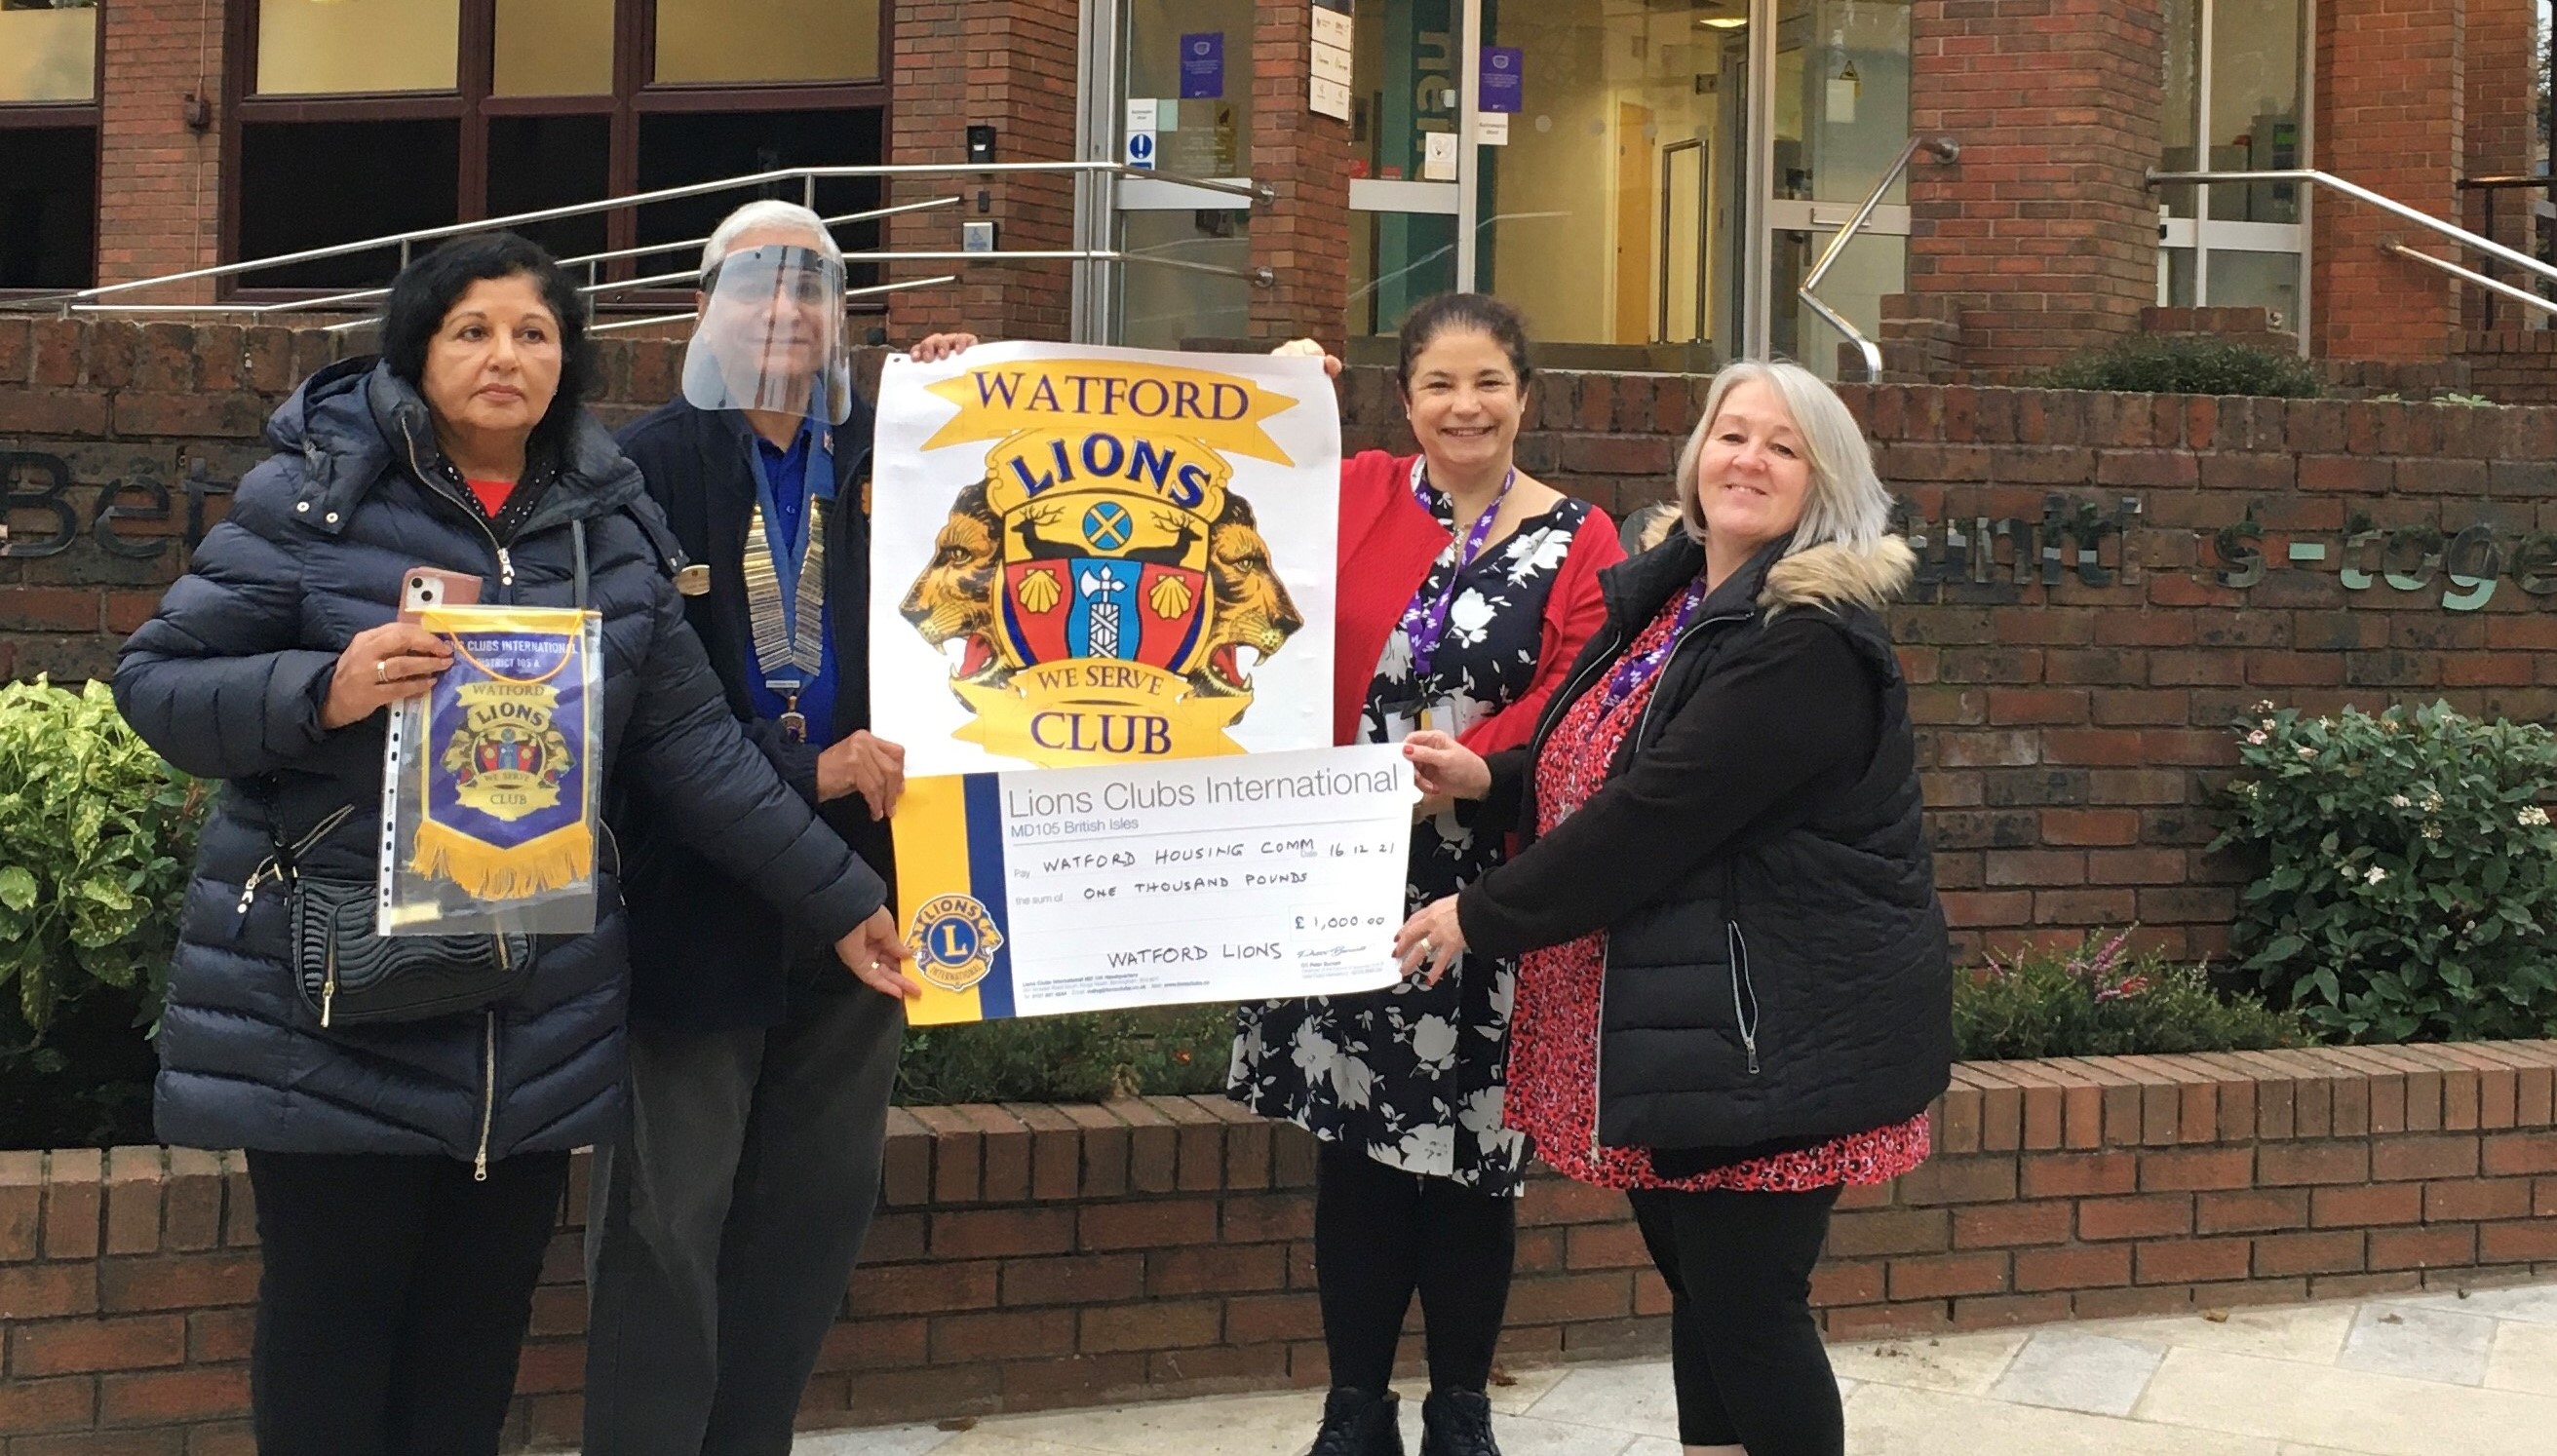 A generous donation from Watford Lions Club!